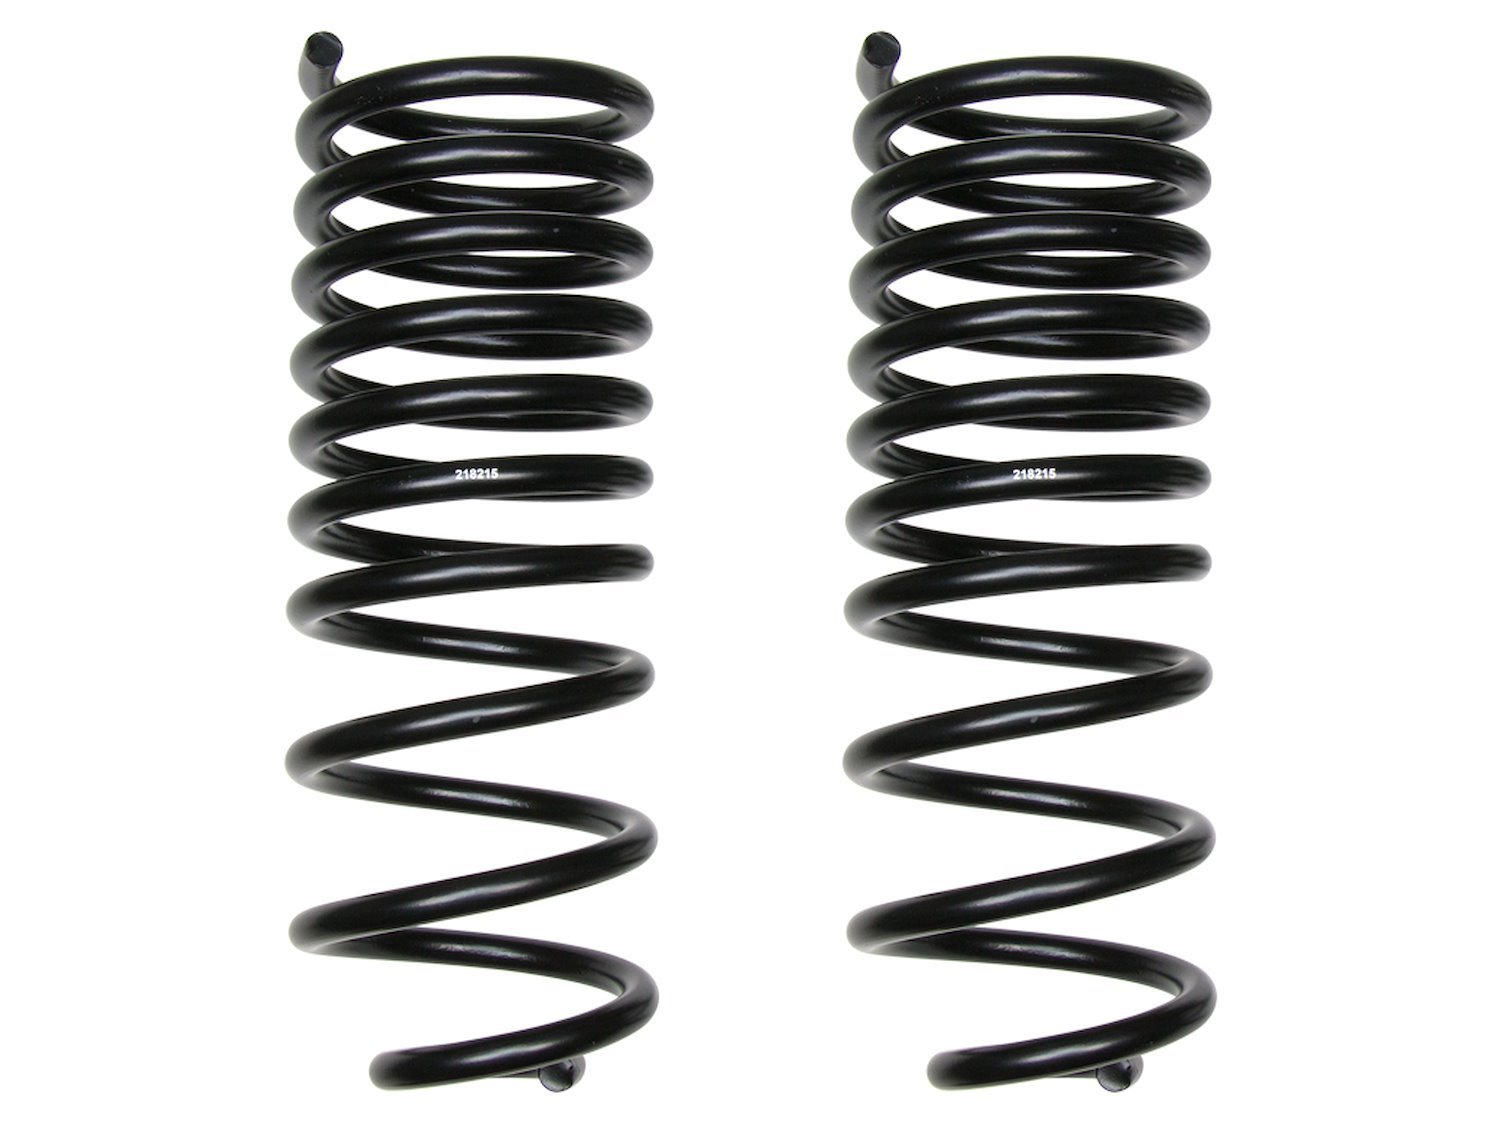 2014-UP RAM 2500 2 in. REAR PERFORMANCE SPRING